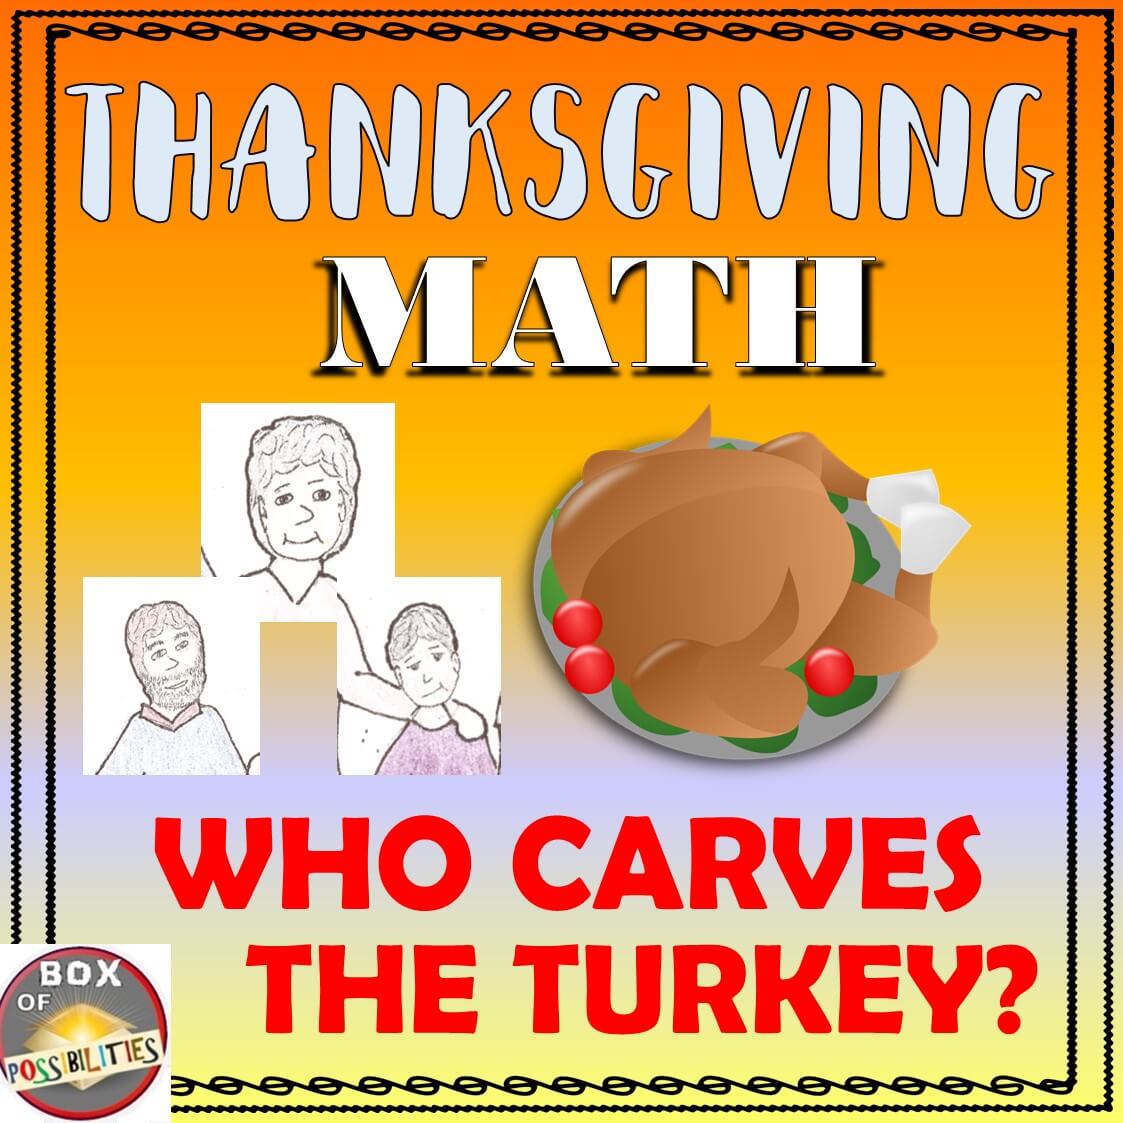 12 Fun Math Worksheets and Math Activities For Every Holiday and Season. Christmas to Easter and Winter to Spring!